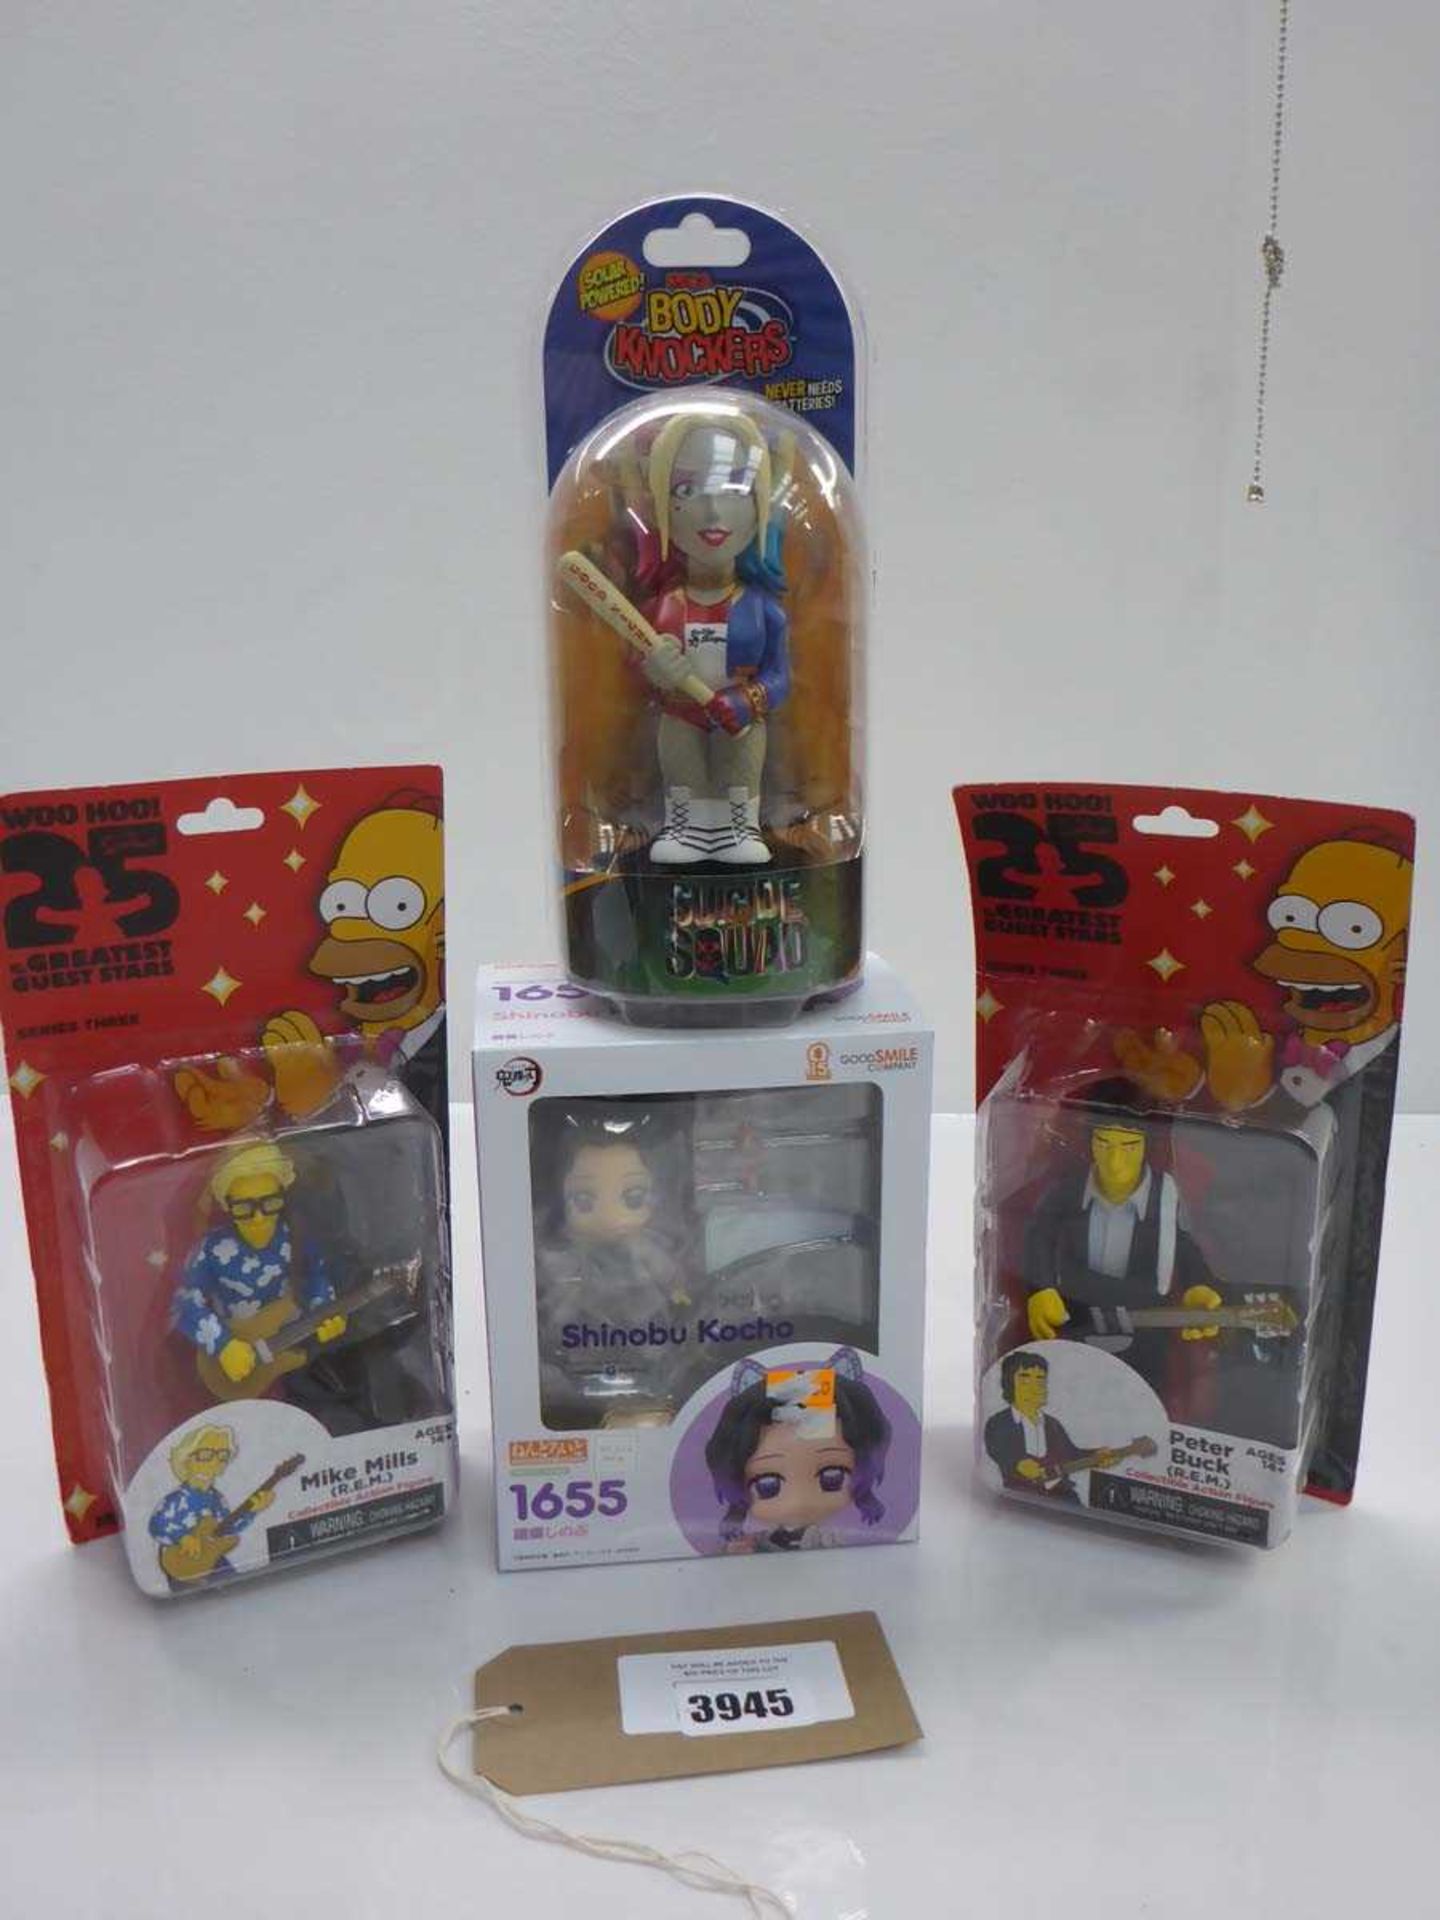 +VAT NECA Woo Hoo! The Simpsons Peter Buck & Mike Mills figures together with NECA Suicide Squad